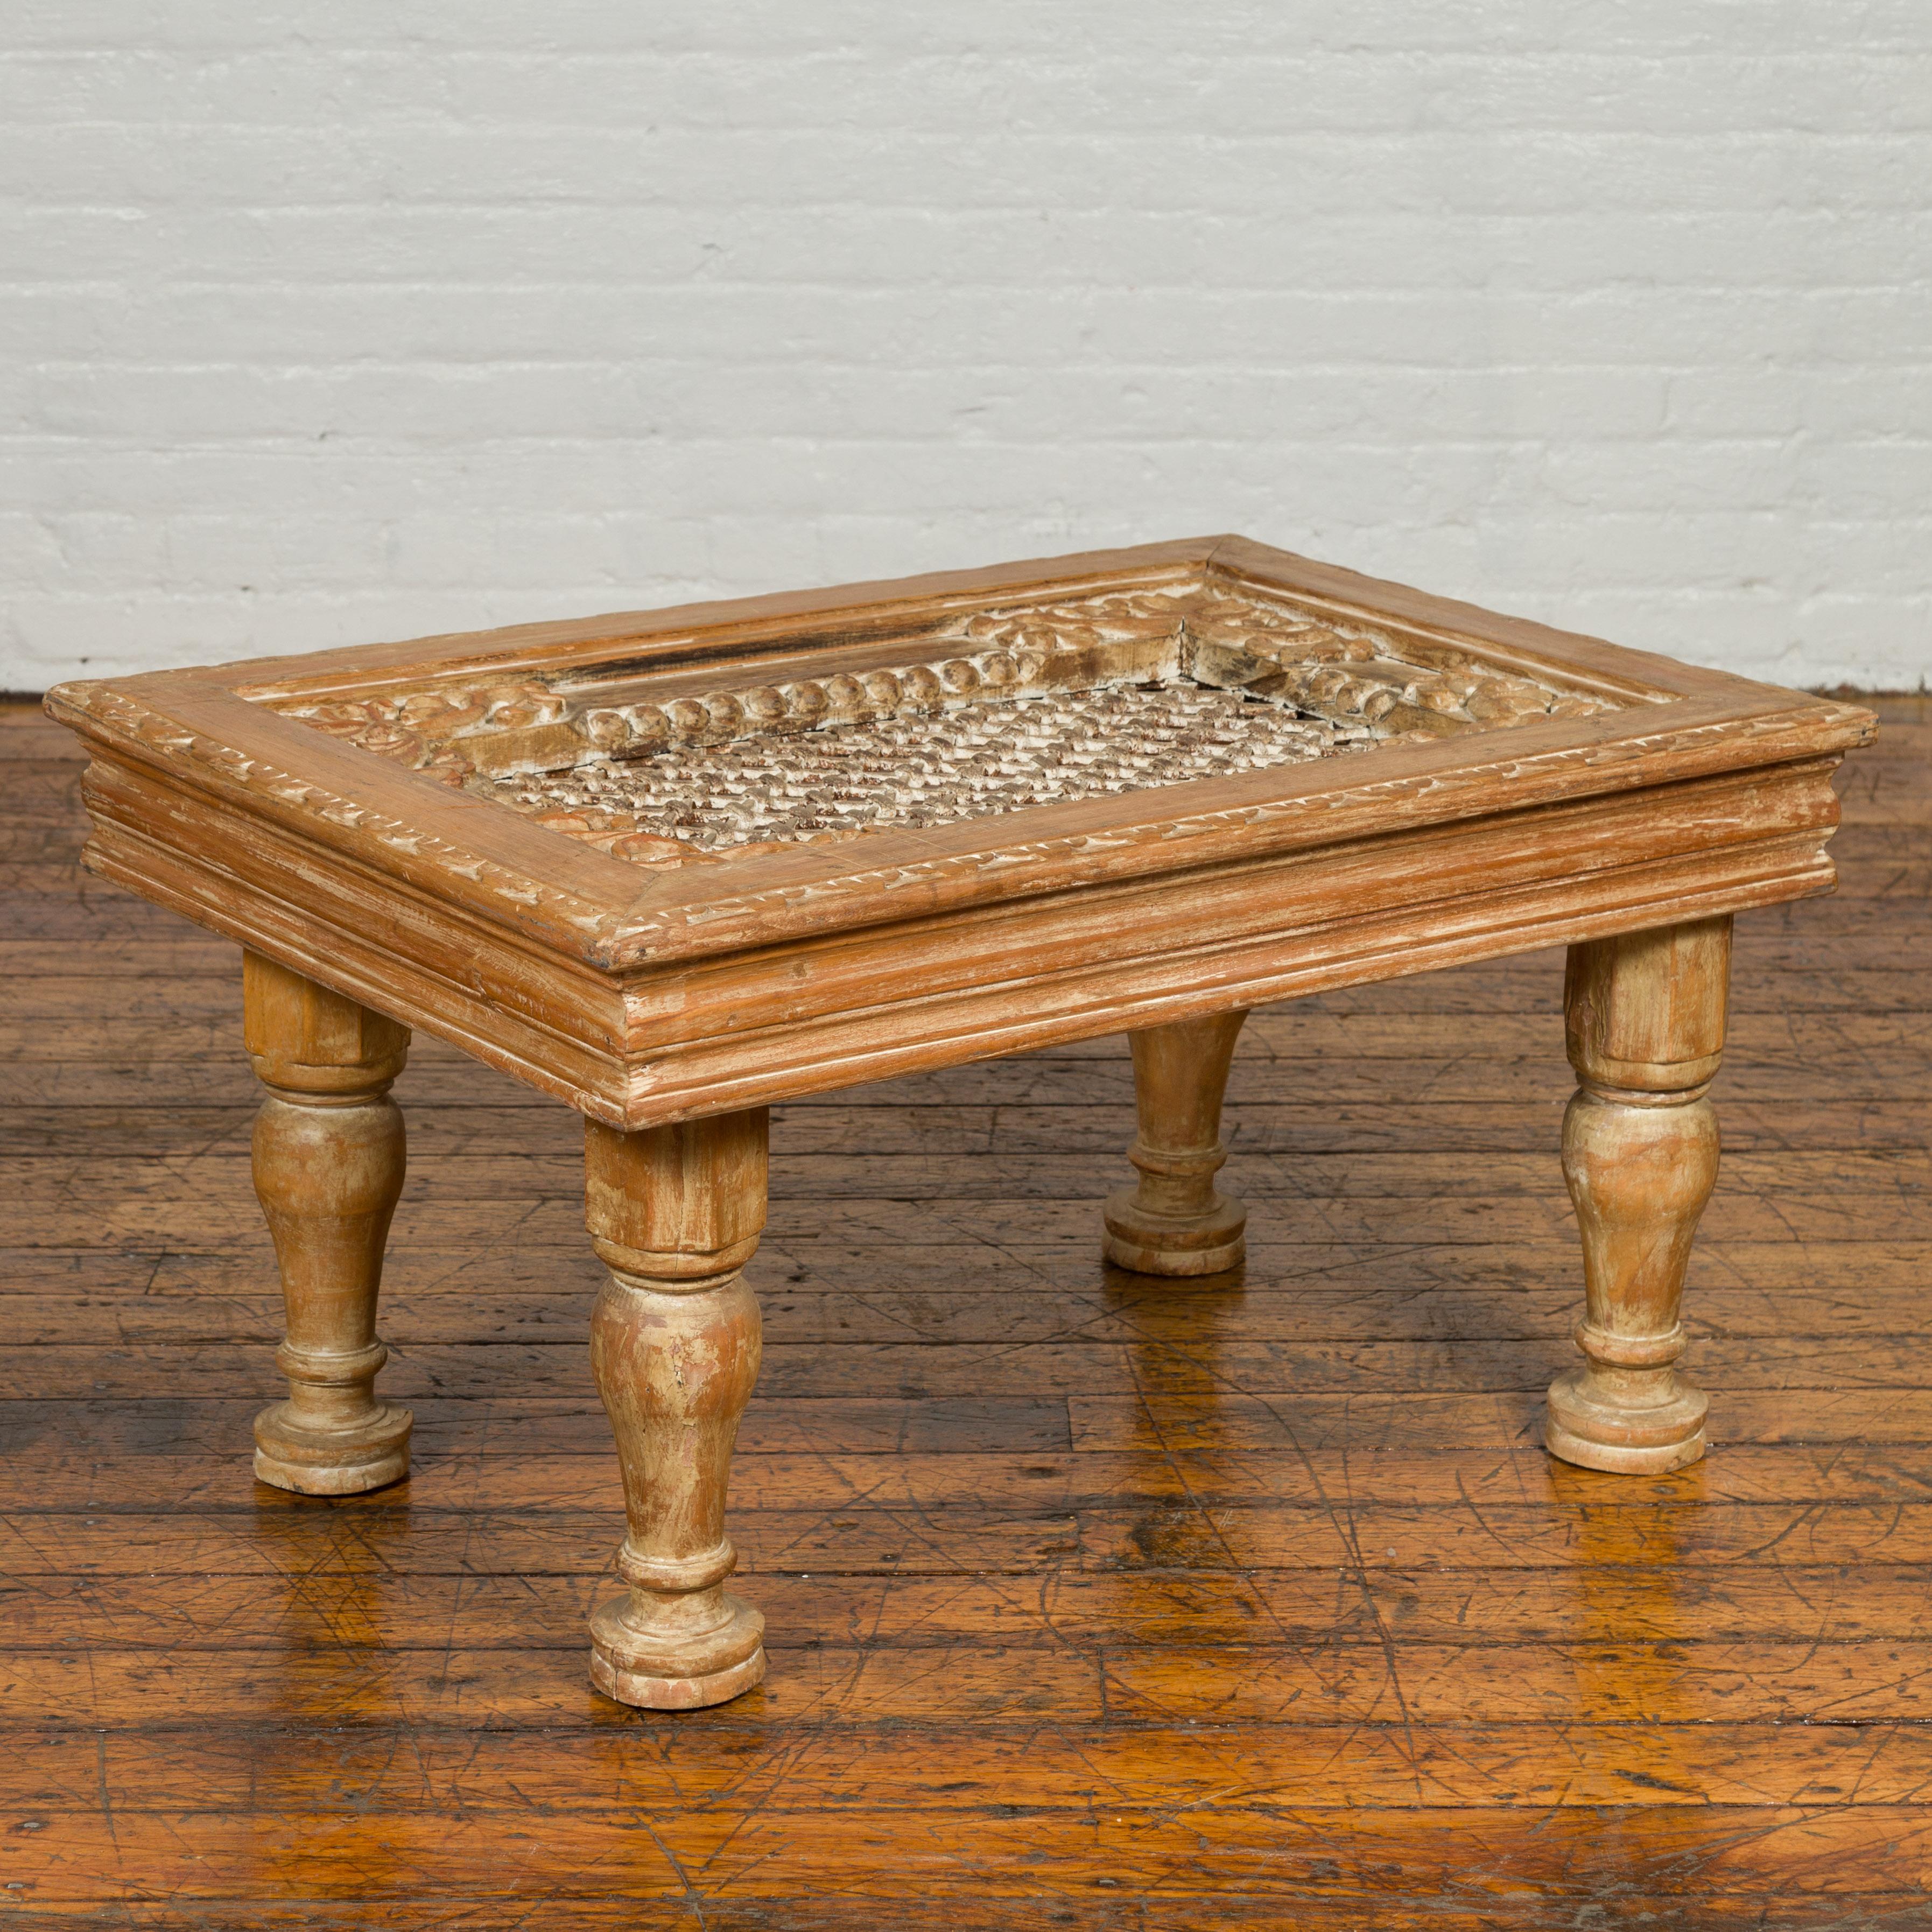 20th Century Rustic Indian Window Grate Cocktail Table with Iron Top and Baluster Legs For Sale